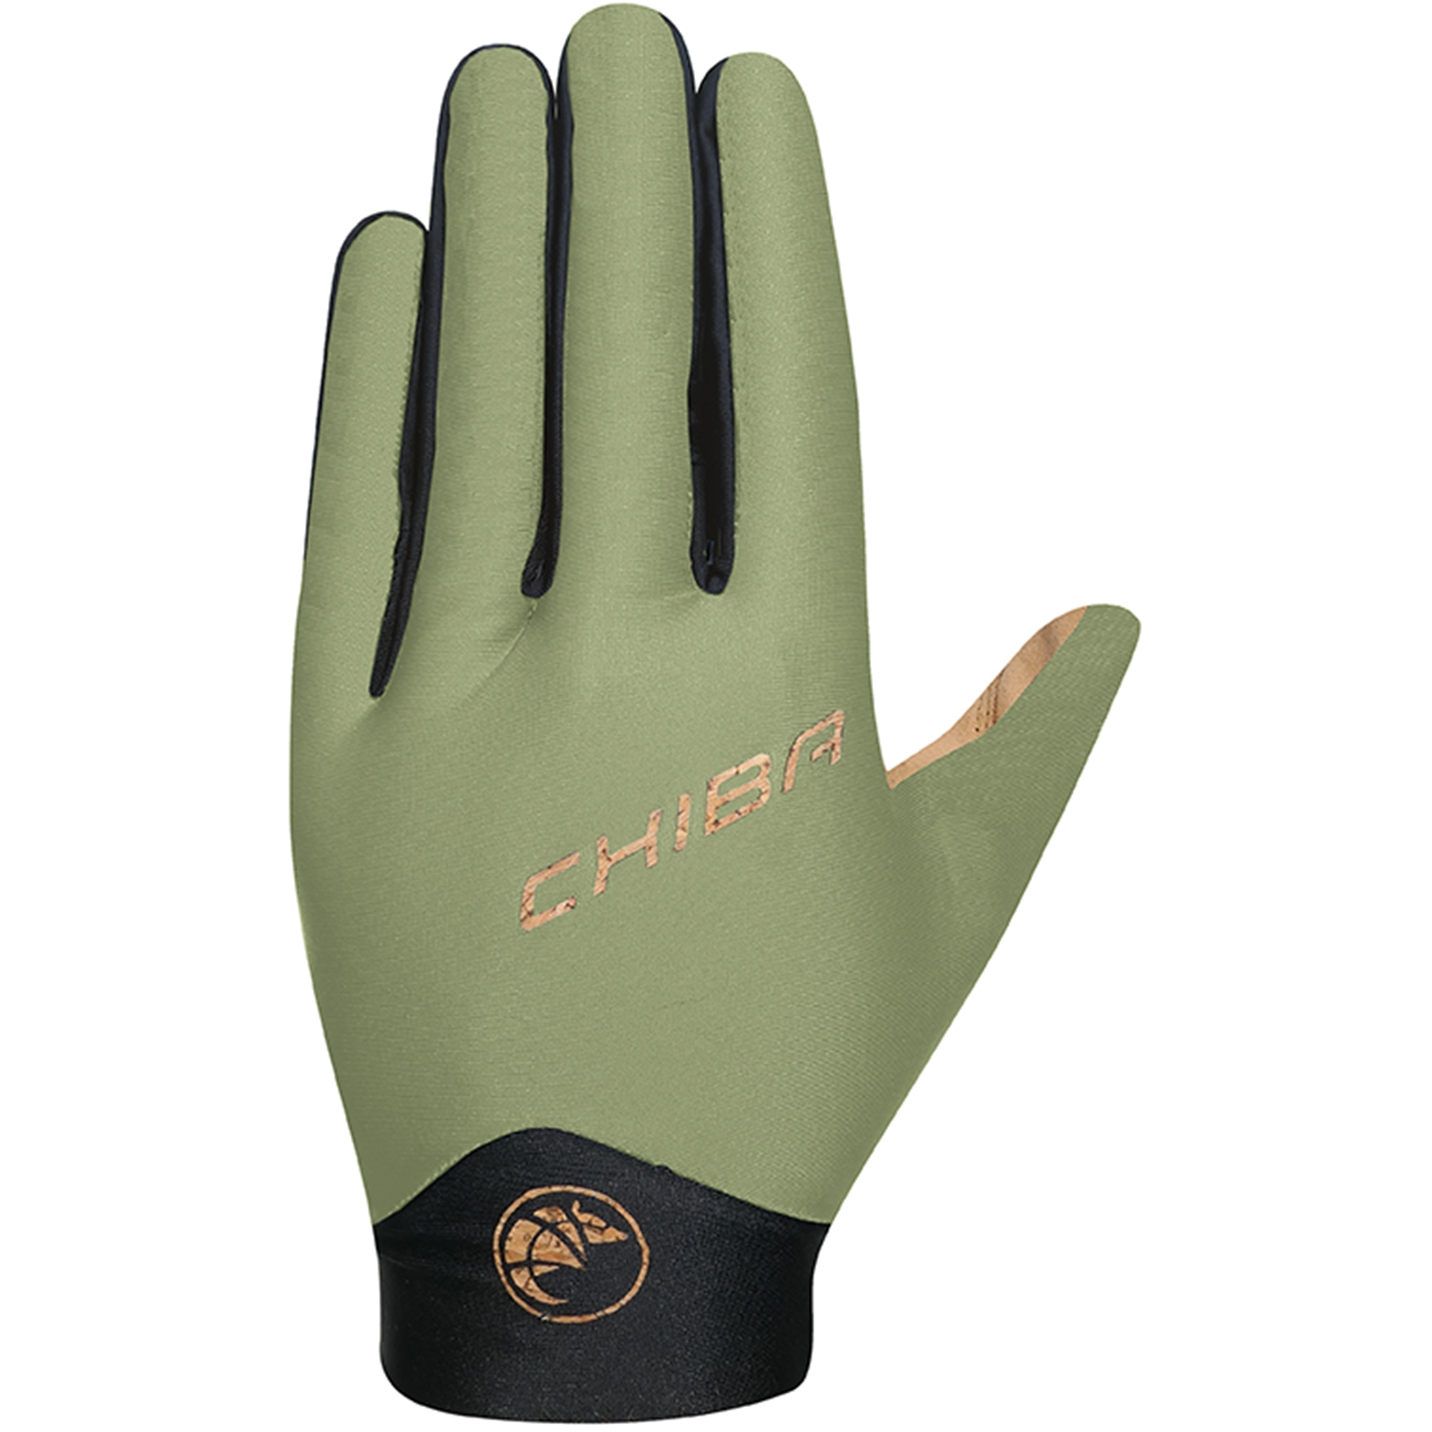 Picture of Chiba ECO Pro Touring Cycling Gloves - olive